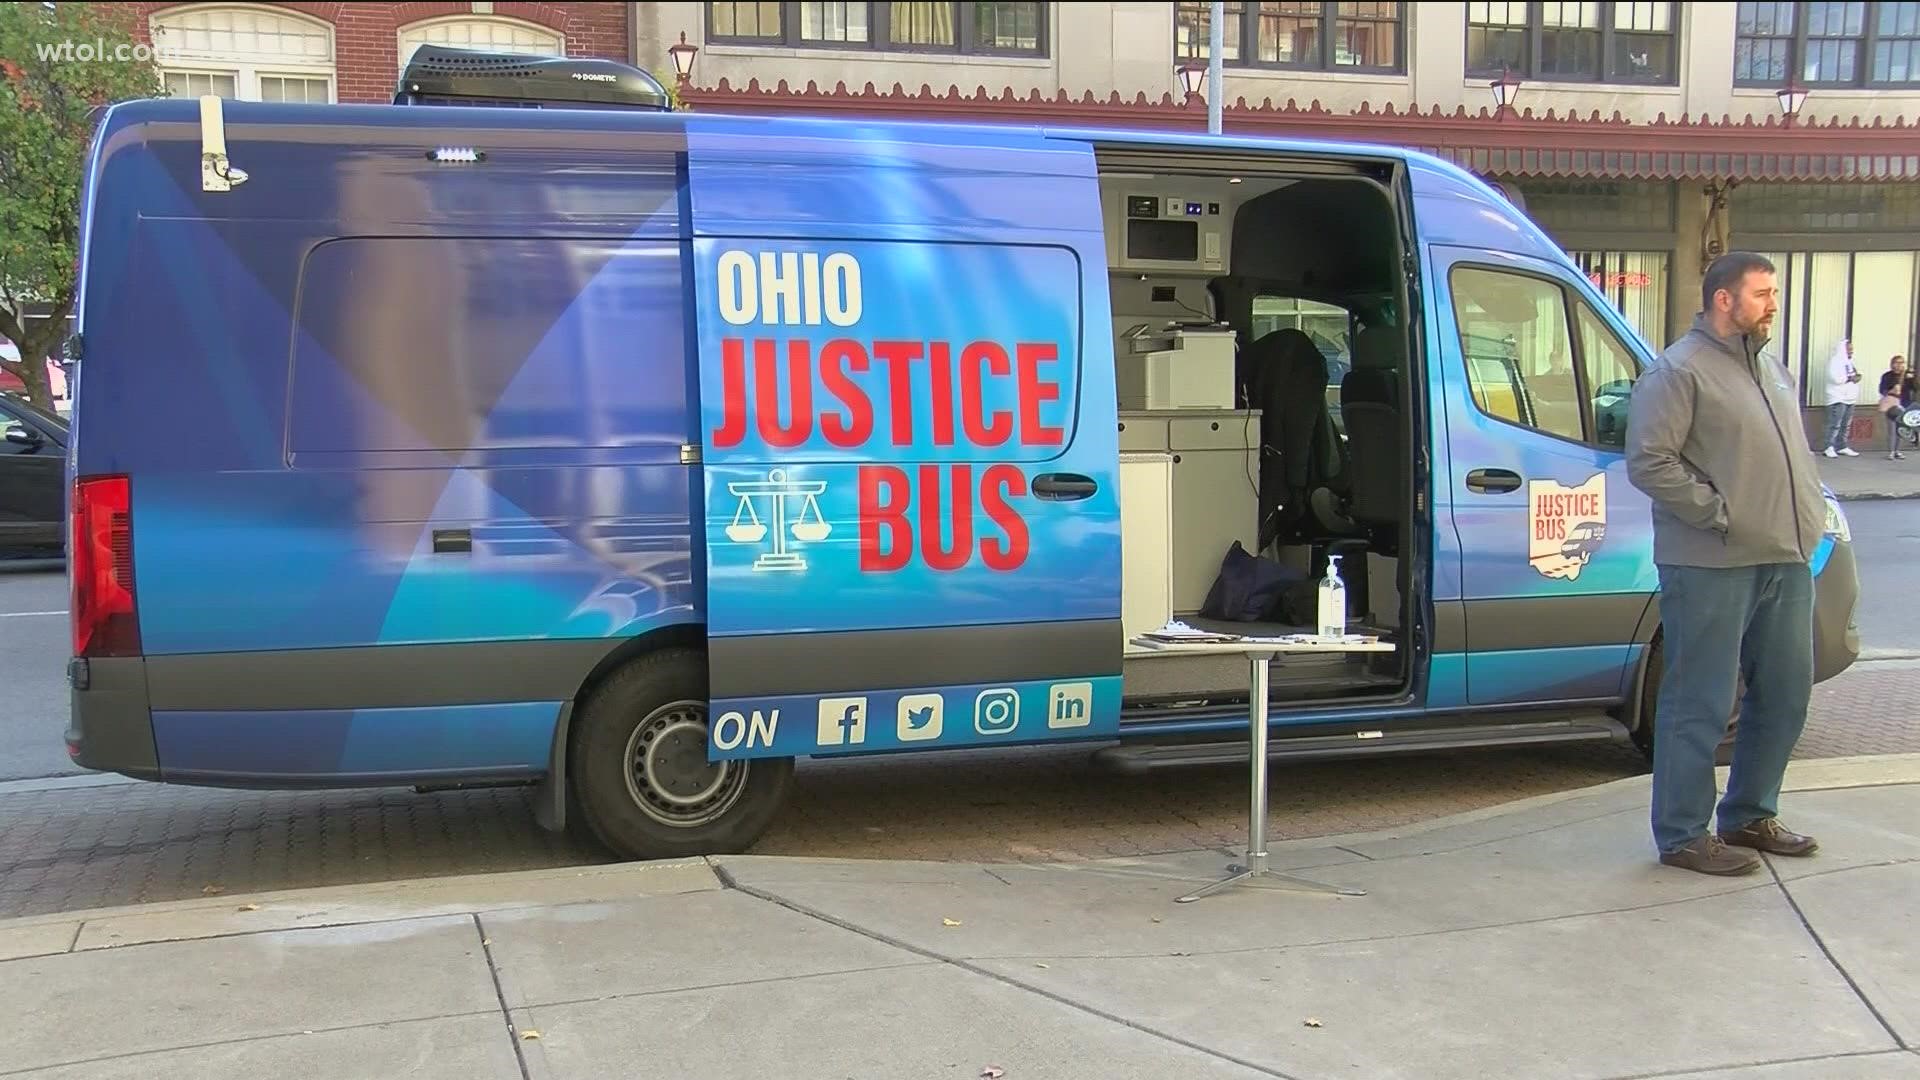 The Ohio Justice Bus will provide free legal advice involving domestic relations today at the Sanger branch of the Toledo Lucas County.